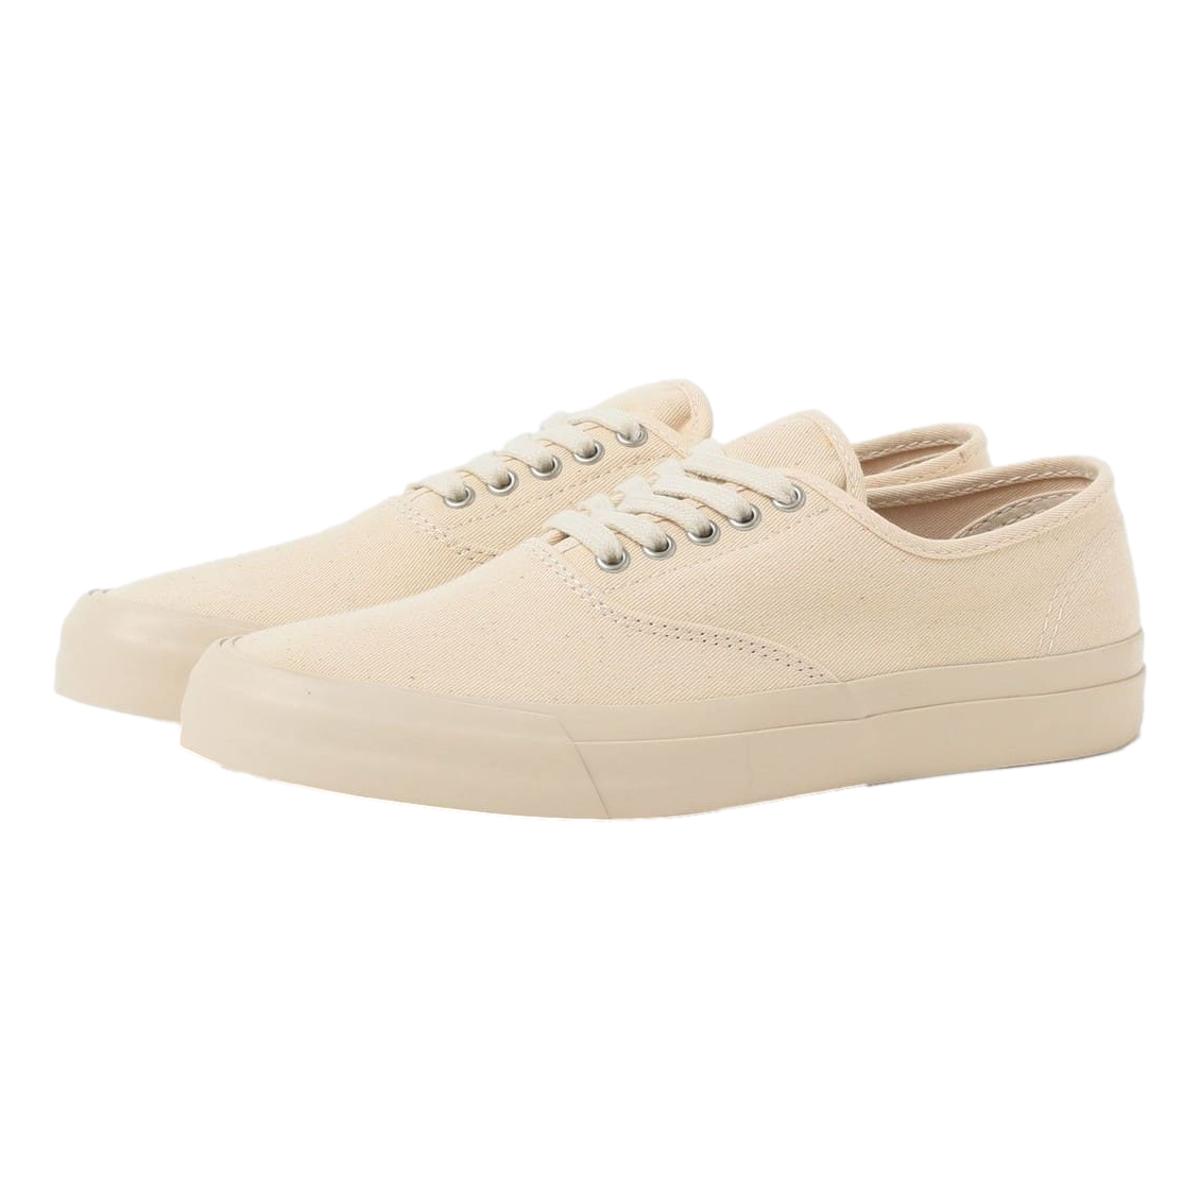 Beams Plus x Sperry Top Sider Deck Shoe Ivory - Shoes